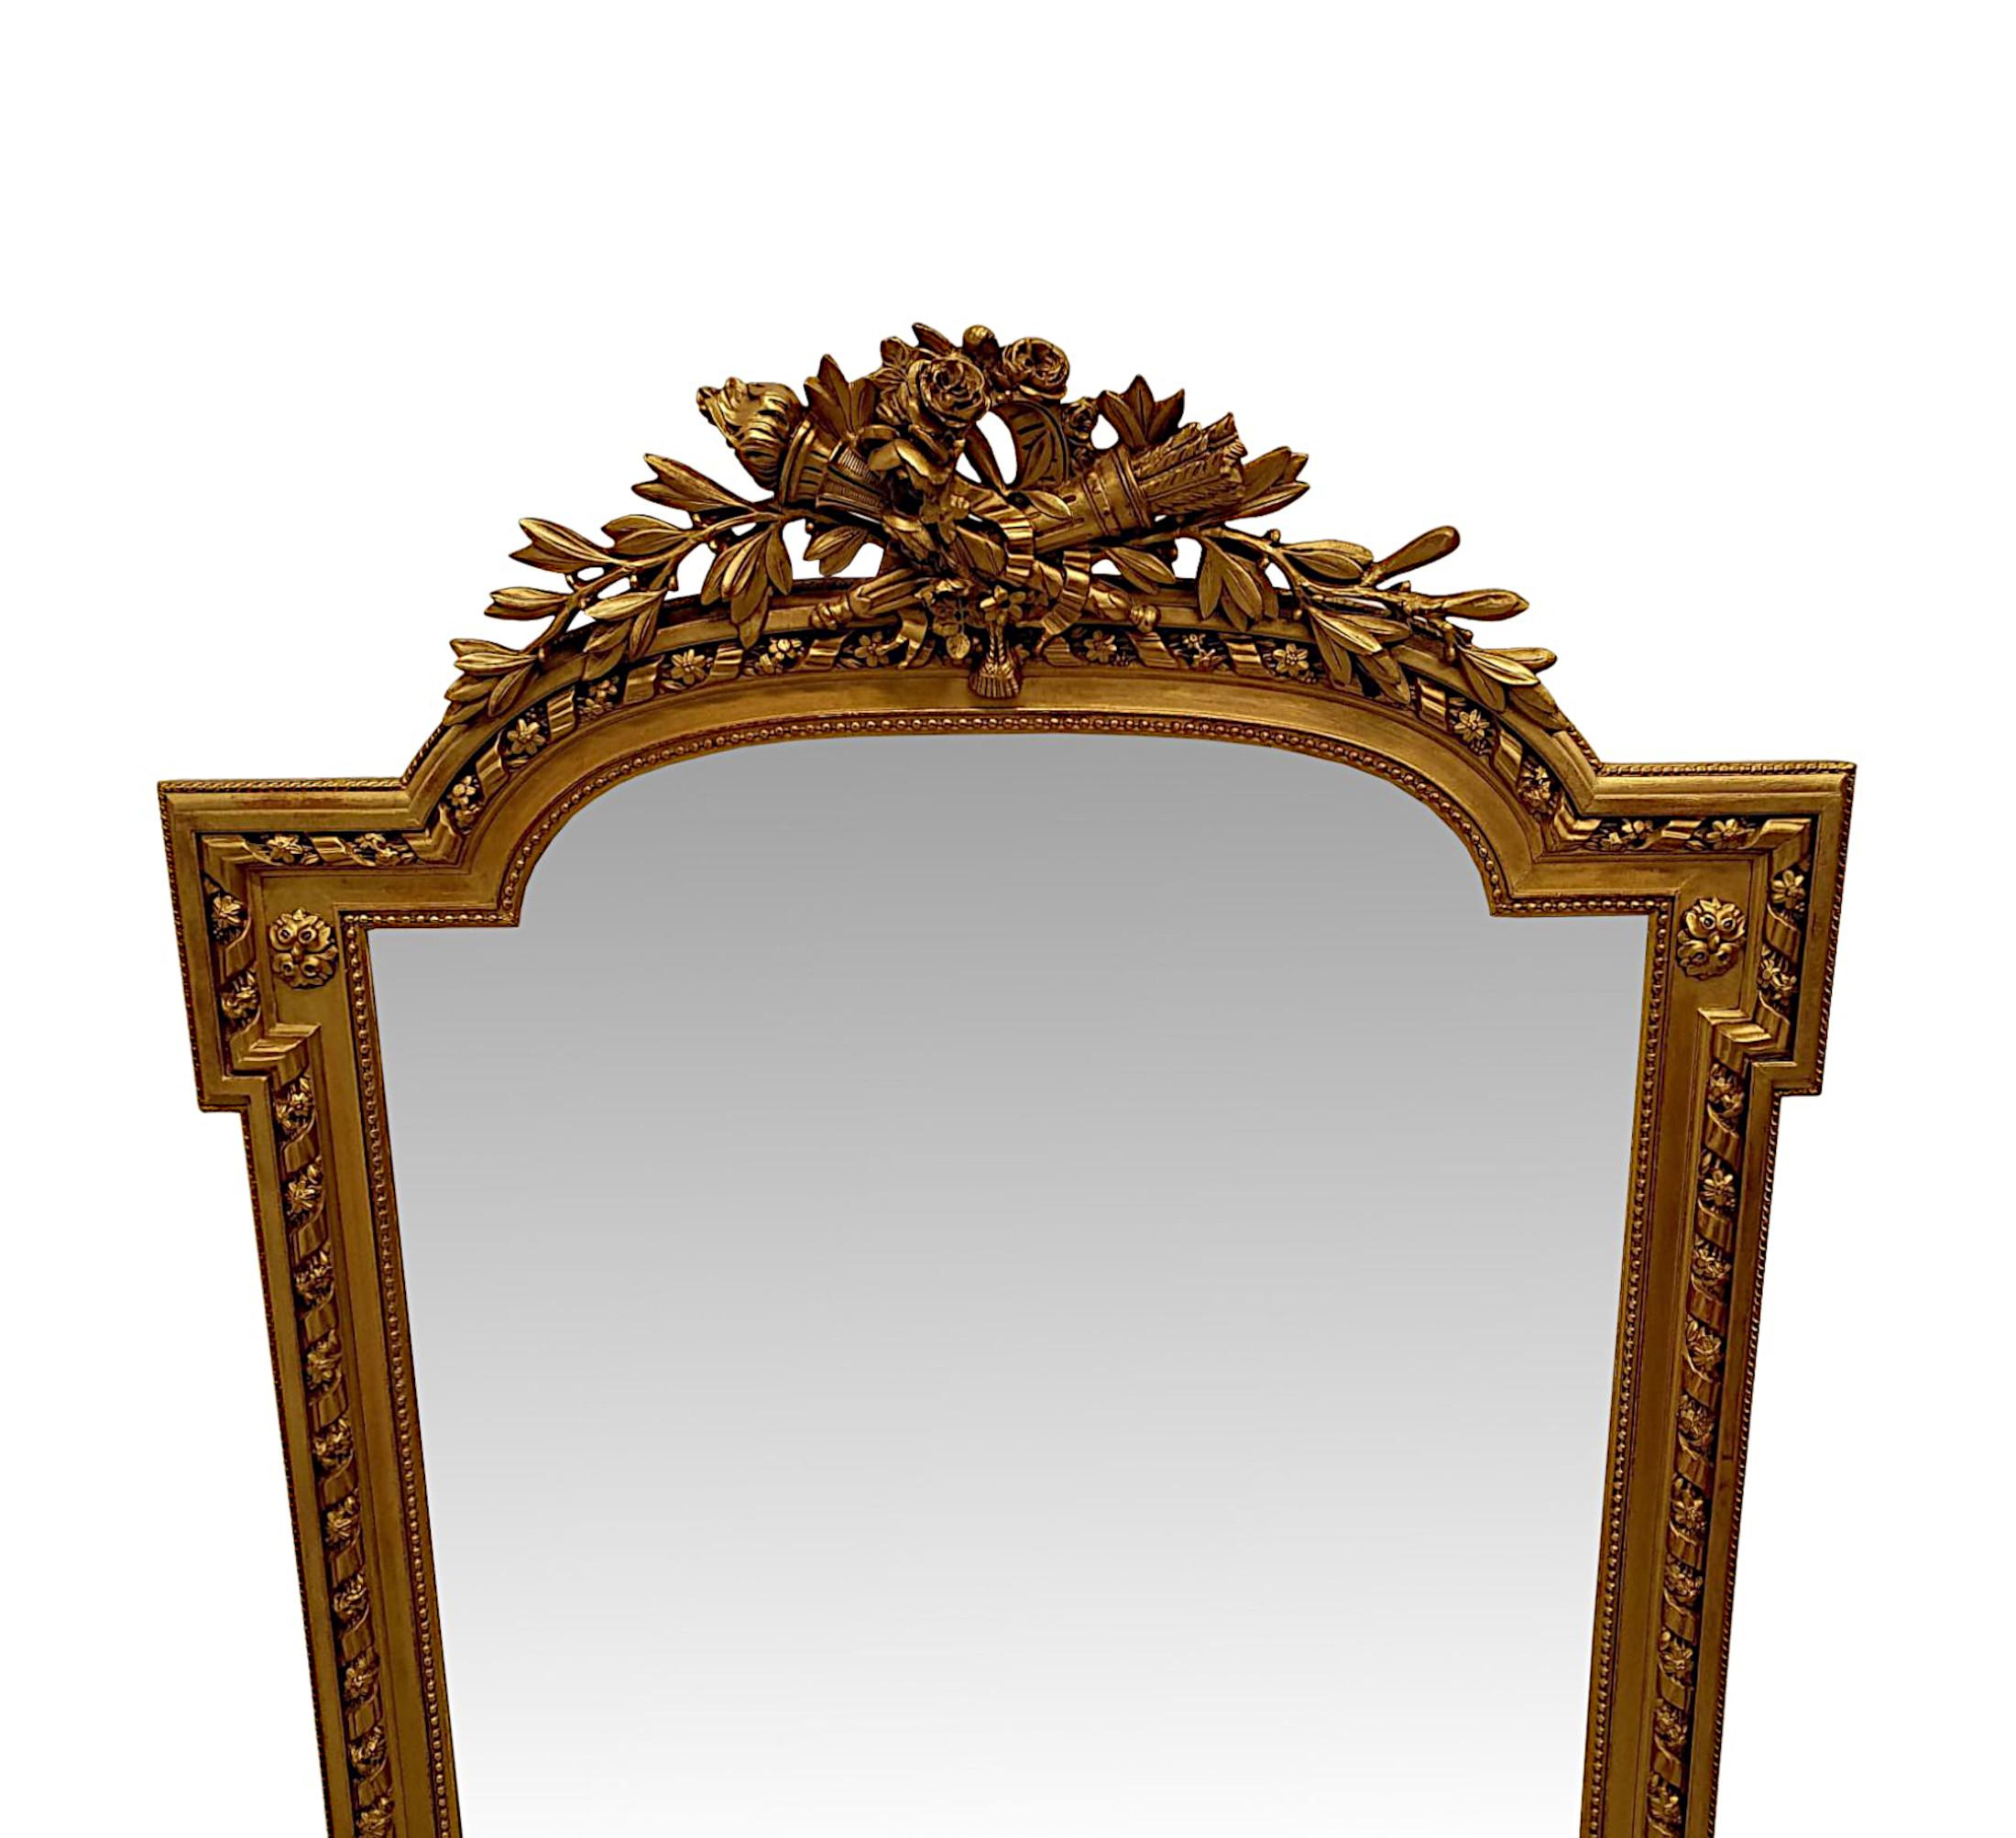 A gorgeous 19th Century gilt finish hall or overmantle mirror, finely hand carved and of exceptional quality.  The mirror glass plate of shaped, rectangular form is set within a gilded moulded frame with beautifully detailed applied flowerhead